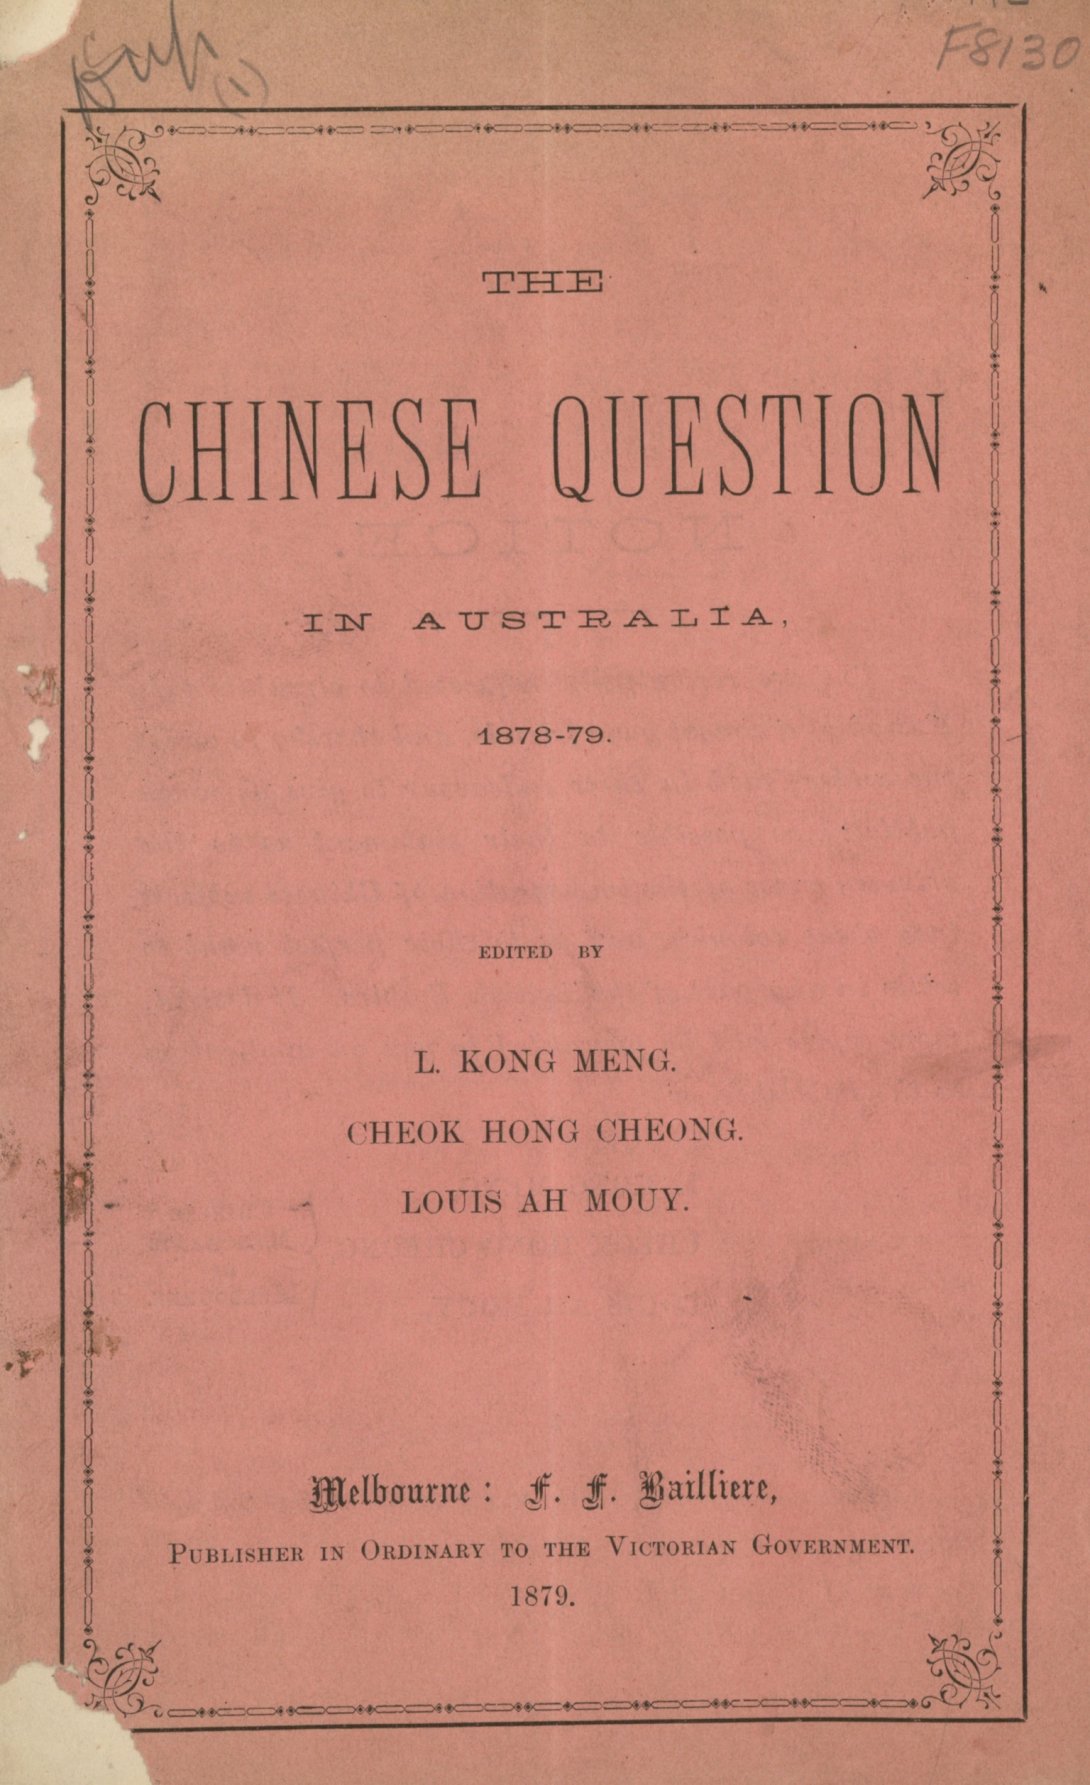 Old red book cover with text reading 'The Chinese Question in Australia' and details of the publication